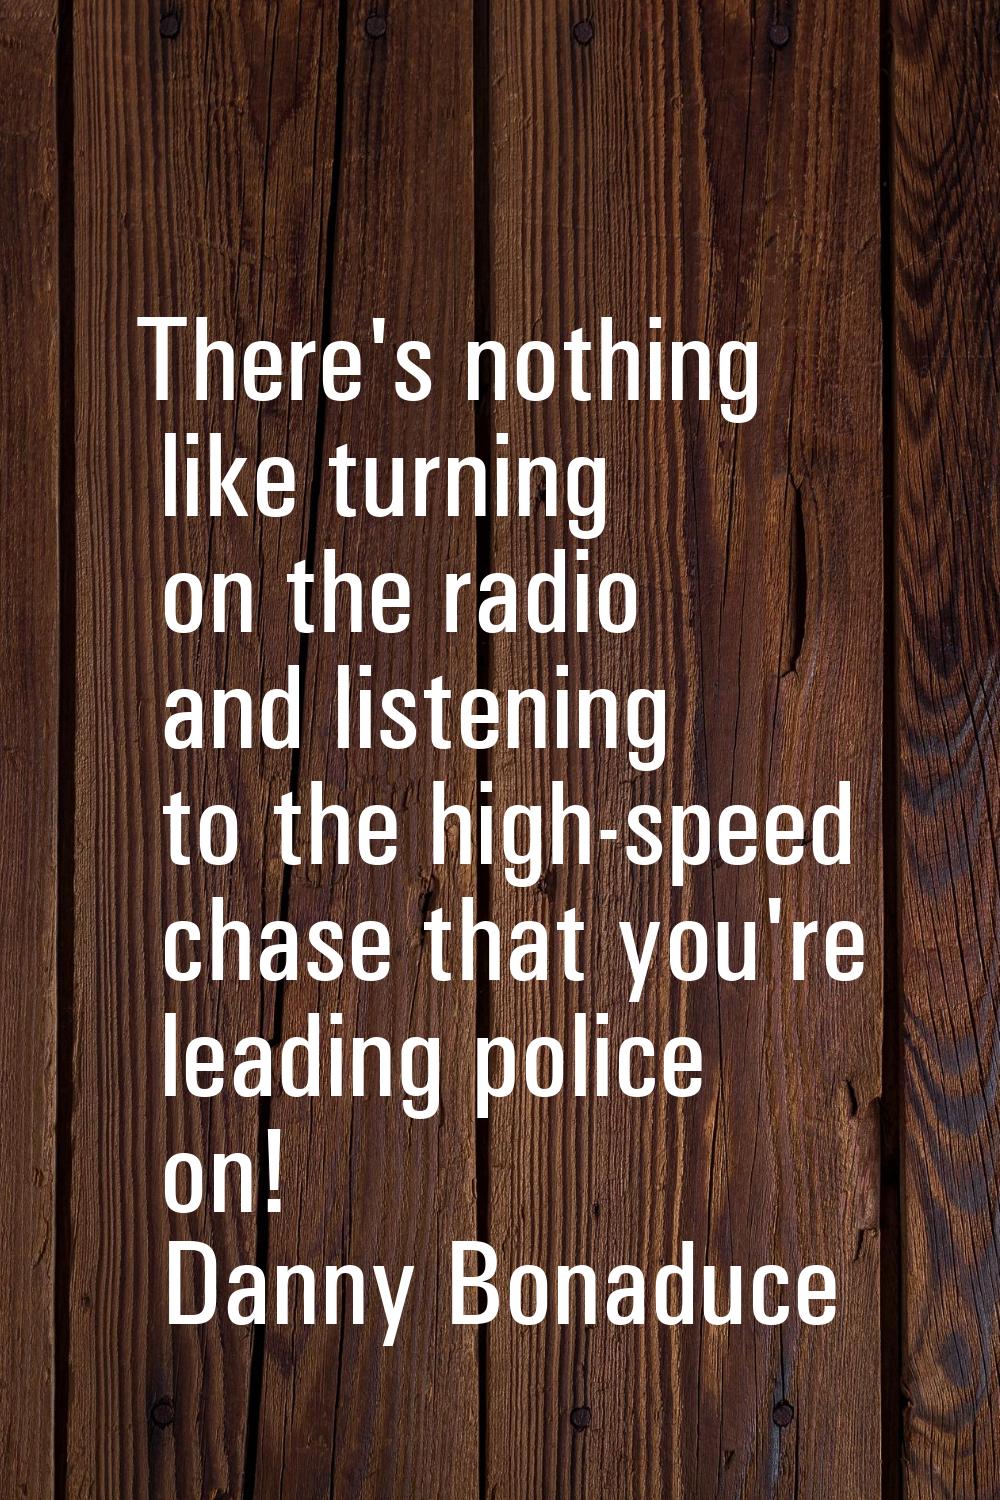 There's nothing like turning on the radio and listening to the high-speed chase that you're leading